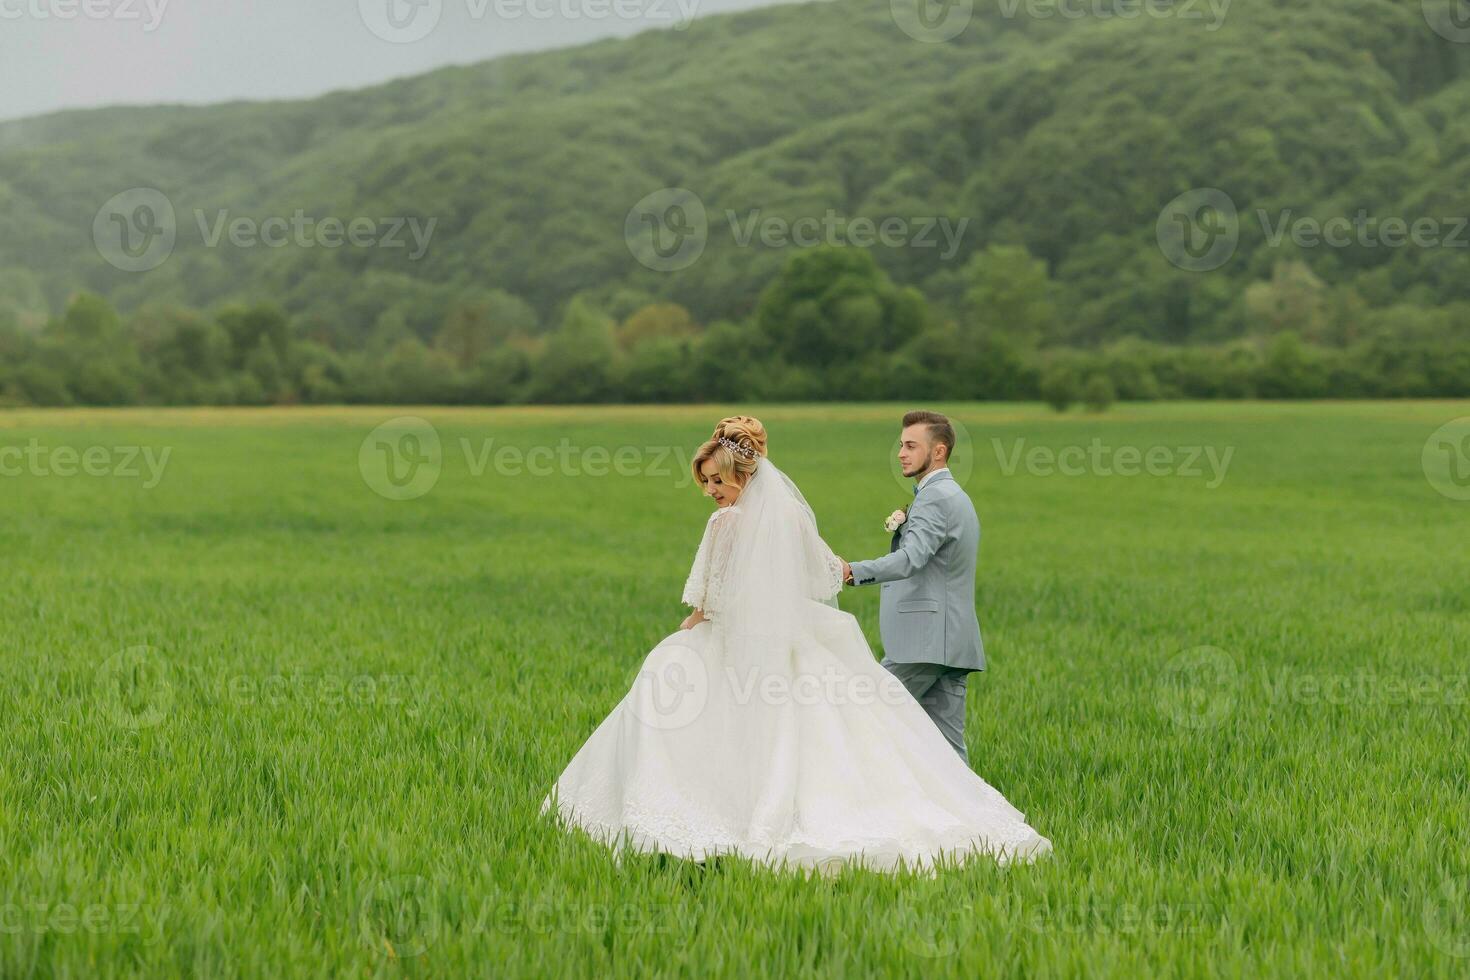 Wide-angle portrait of the bride and groom walking on a green meadow against the background of mountains. Rear view. Magnificent dress. Stylish groom. Wedding photo